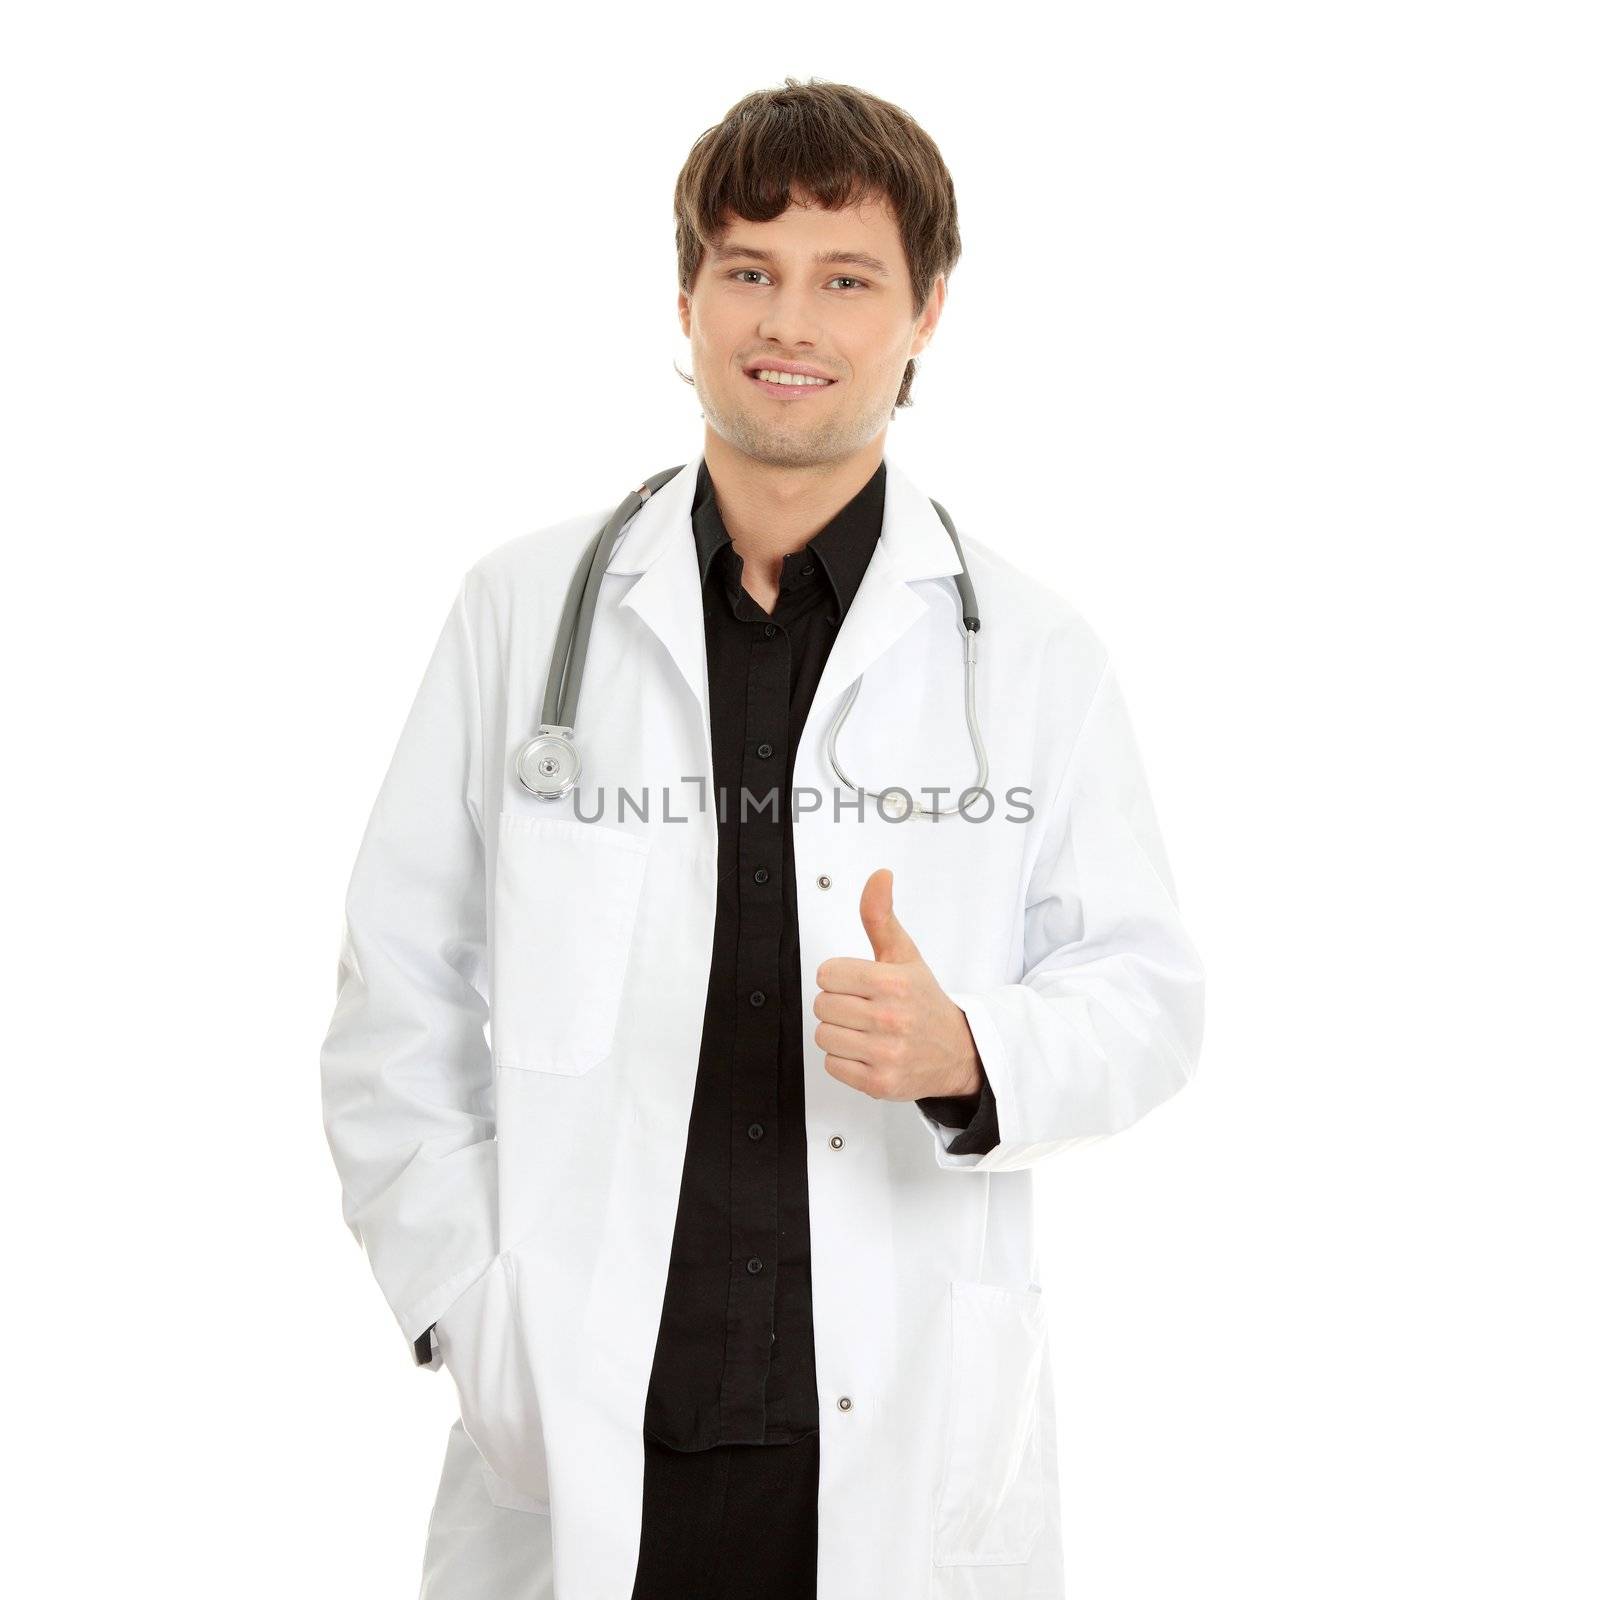 Handsome young doctor isolated on white background